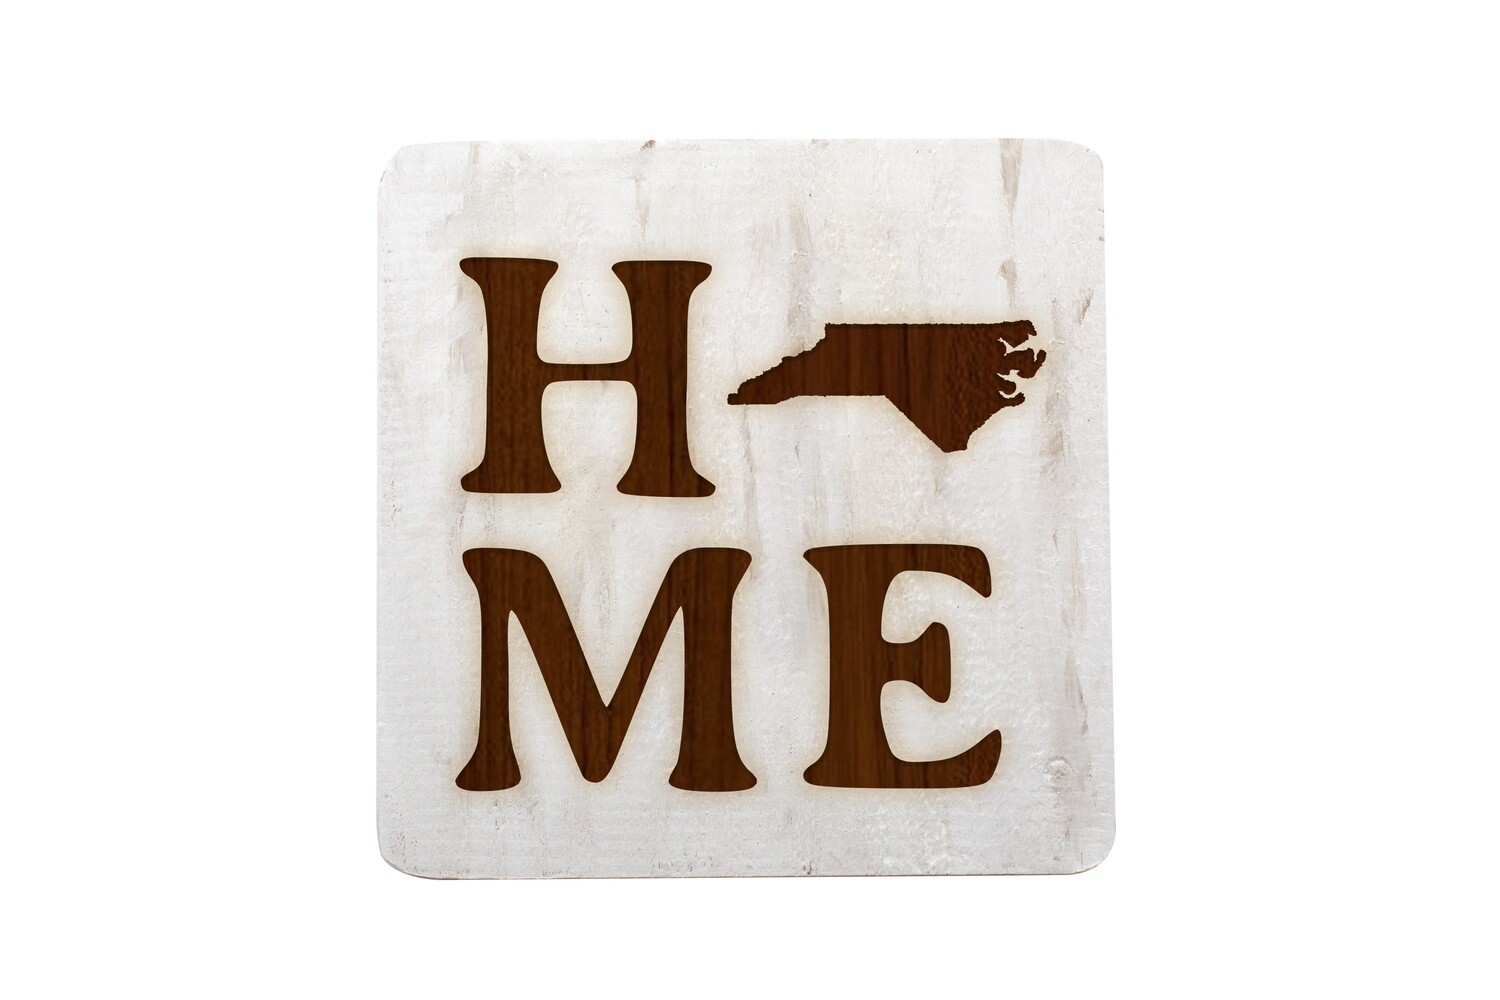 Home Customized w/State Hand-Painted Wood Coaster Set